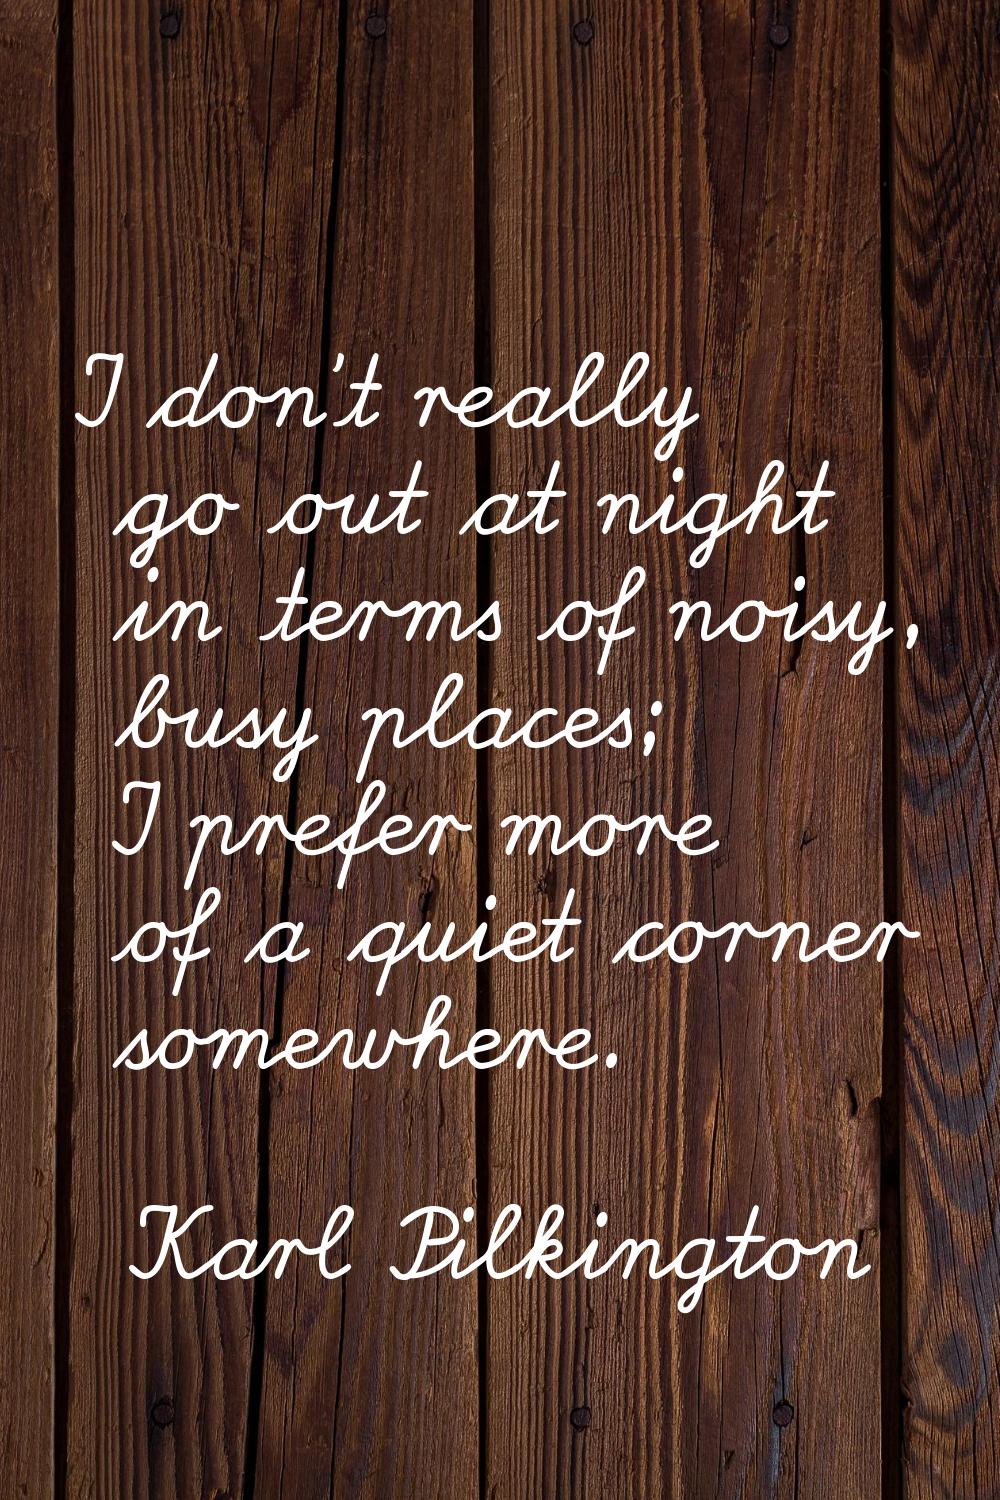 I don't really go out at night in terms of noisy, busy places; I prefer more of a quiet corner some